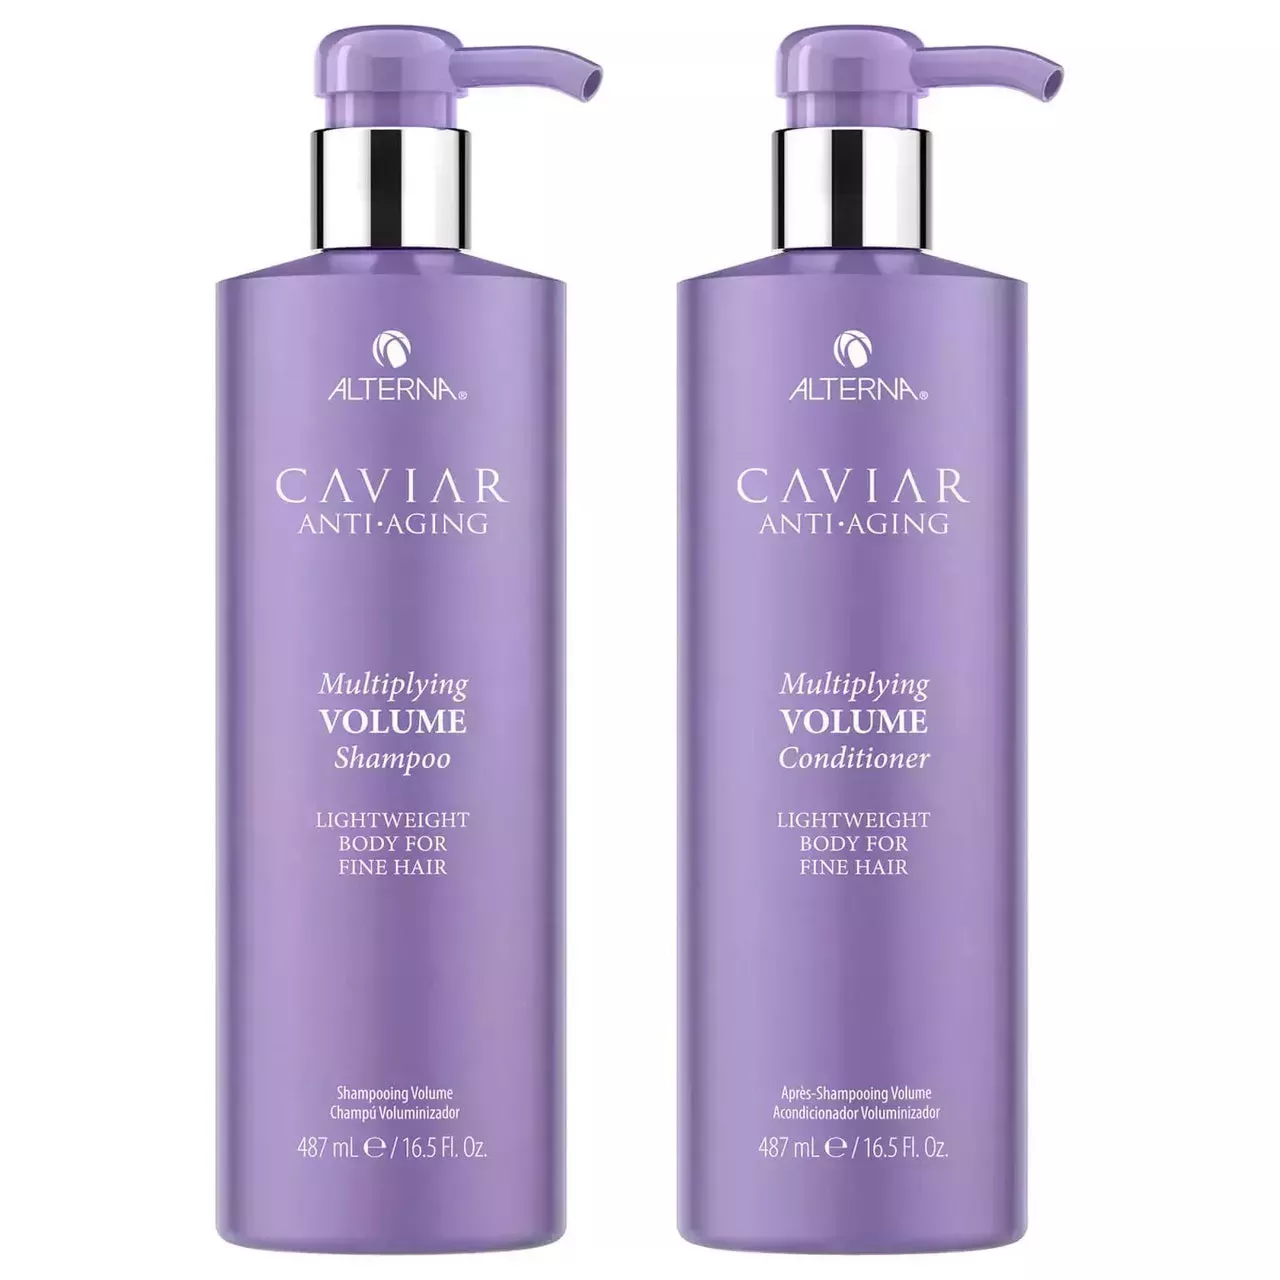 Alterna Caviar Multiplying Volume Large Kit two purple pump bottles of champú and conditioner on white background